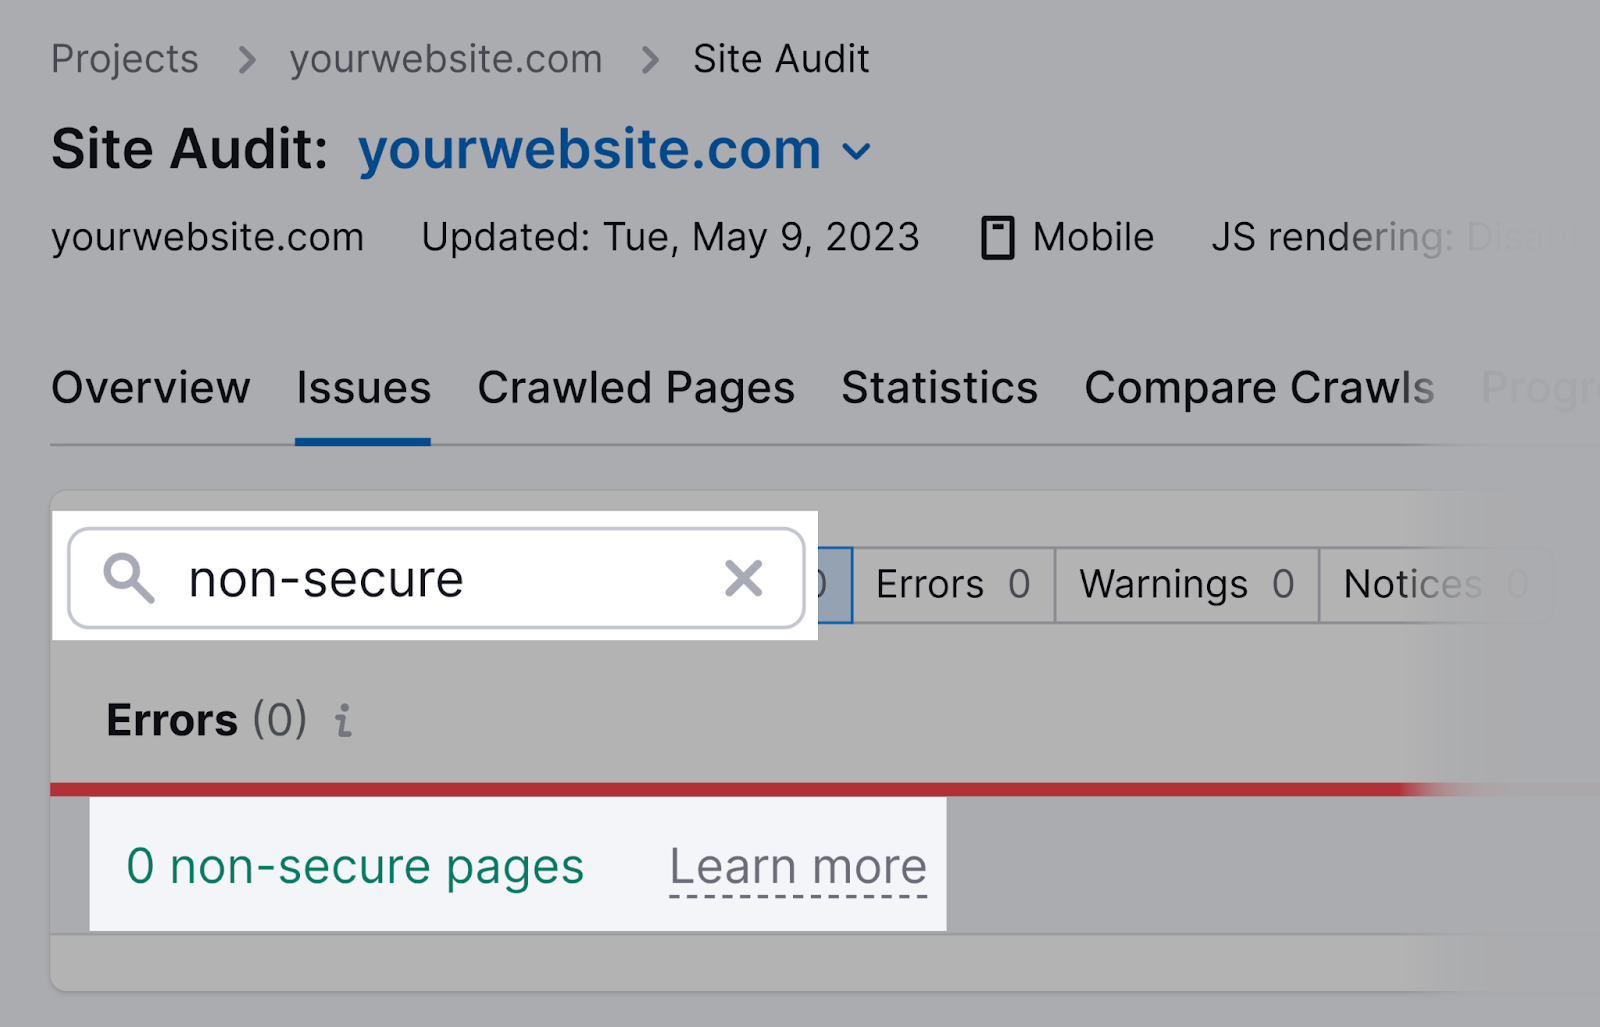 search for “non-secure” in Site Audit "Issues" tab